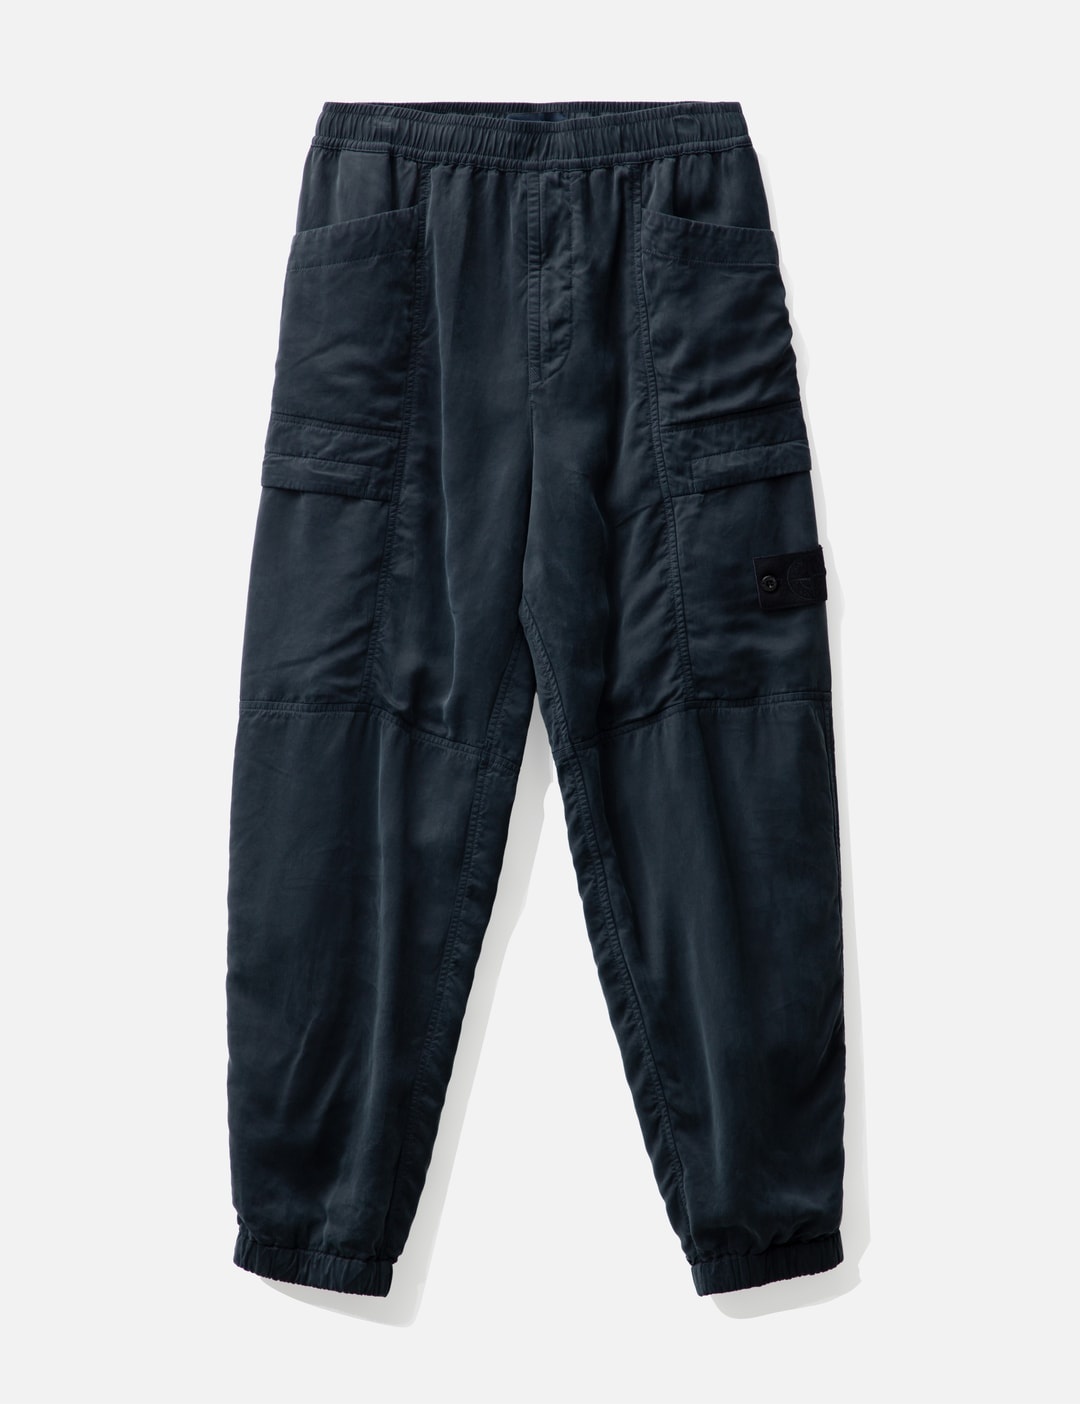 GHOST PIECE LOOSE FIT CARGO PANTS - 1